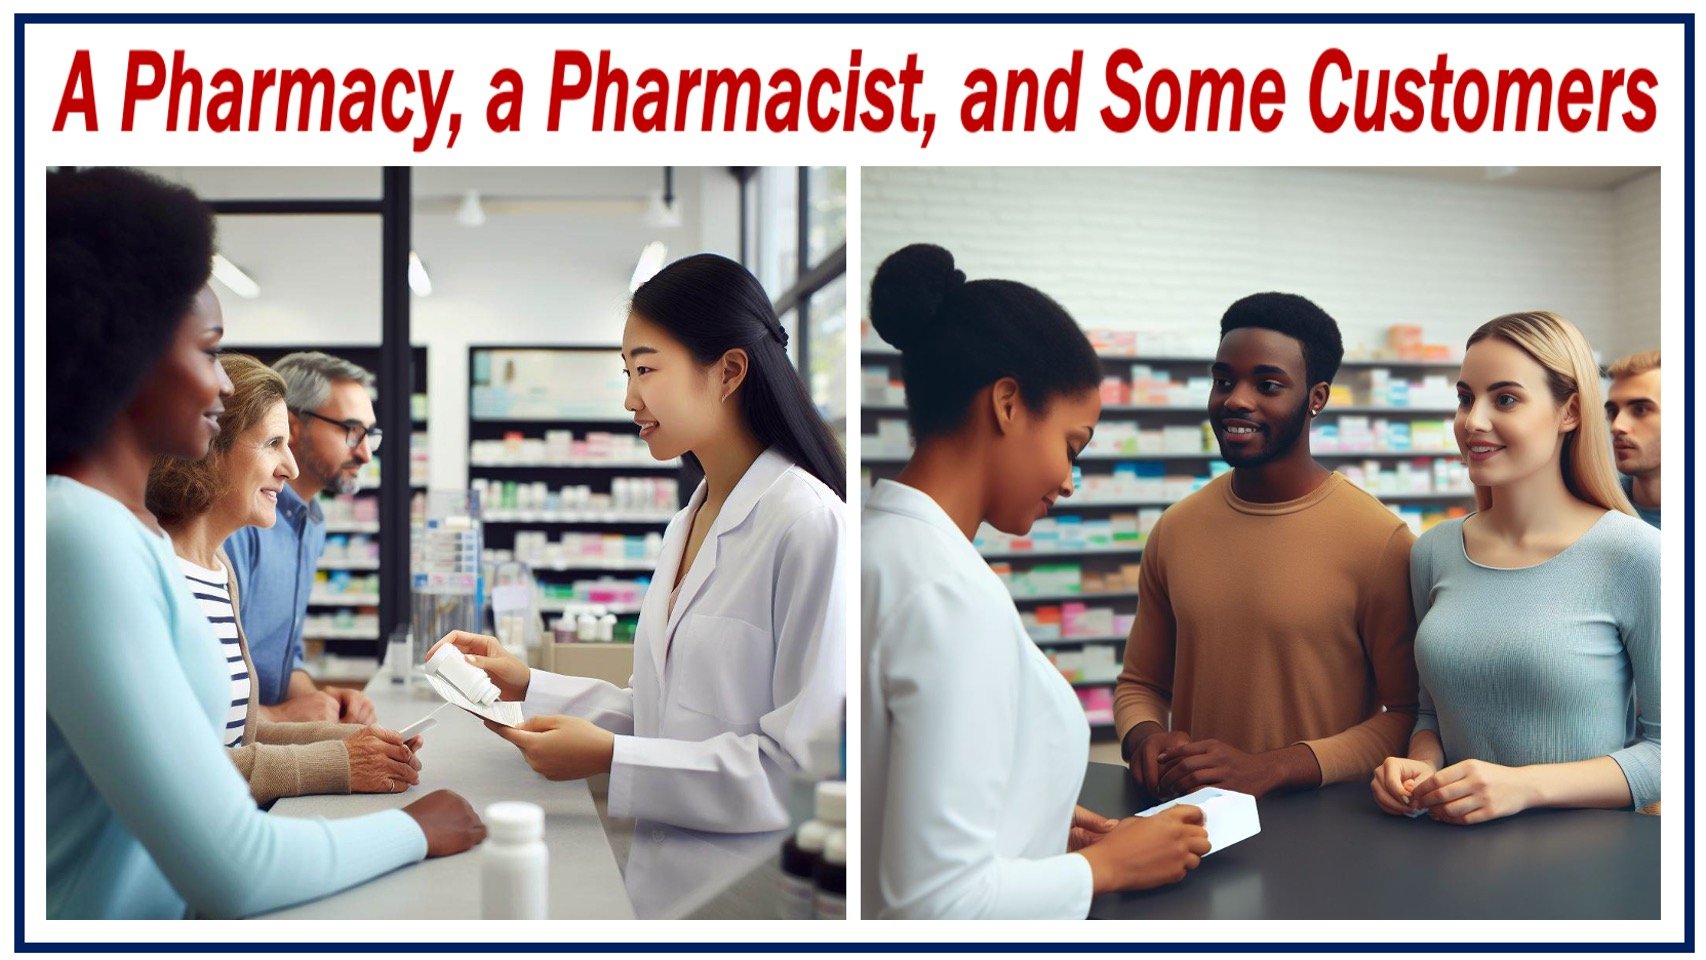 Two images of a pharmacy with a pharmacist and some customers